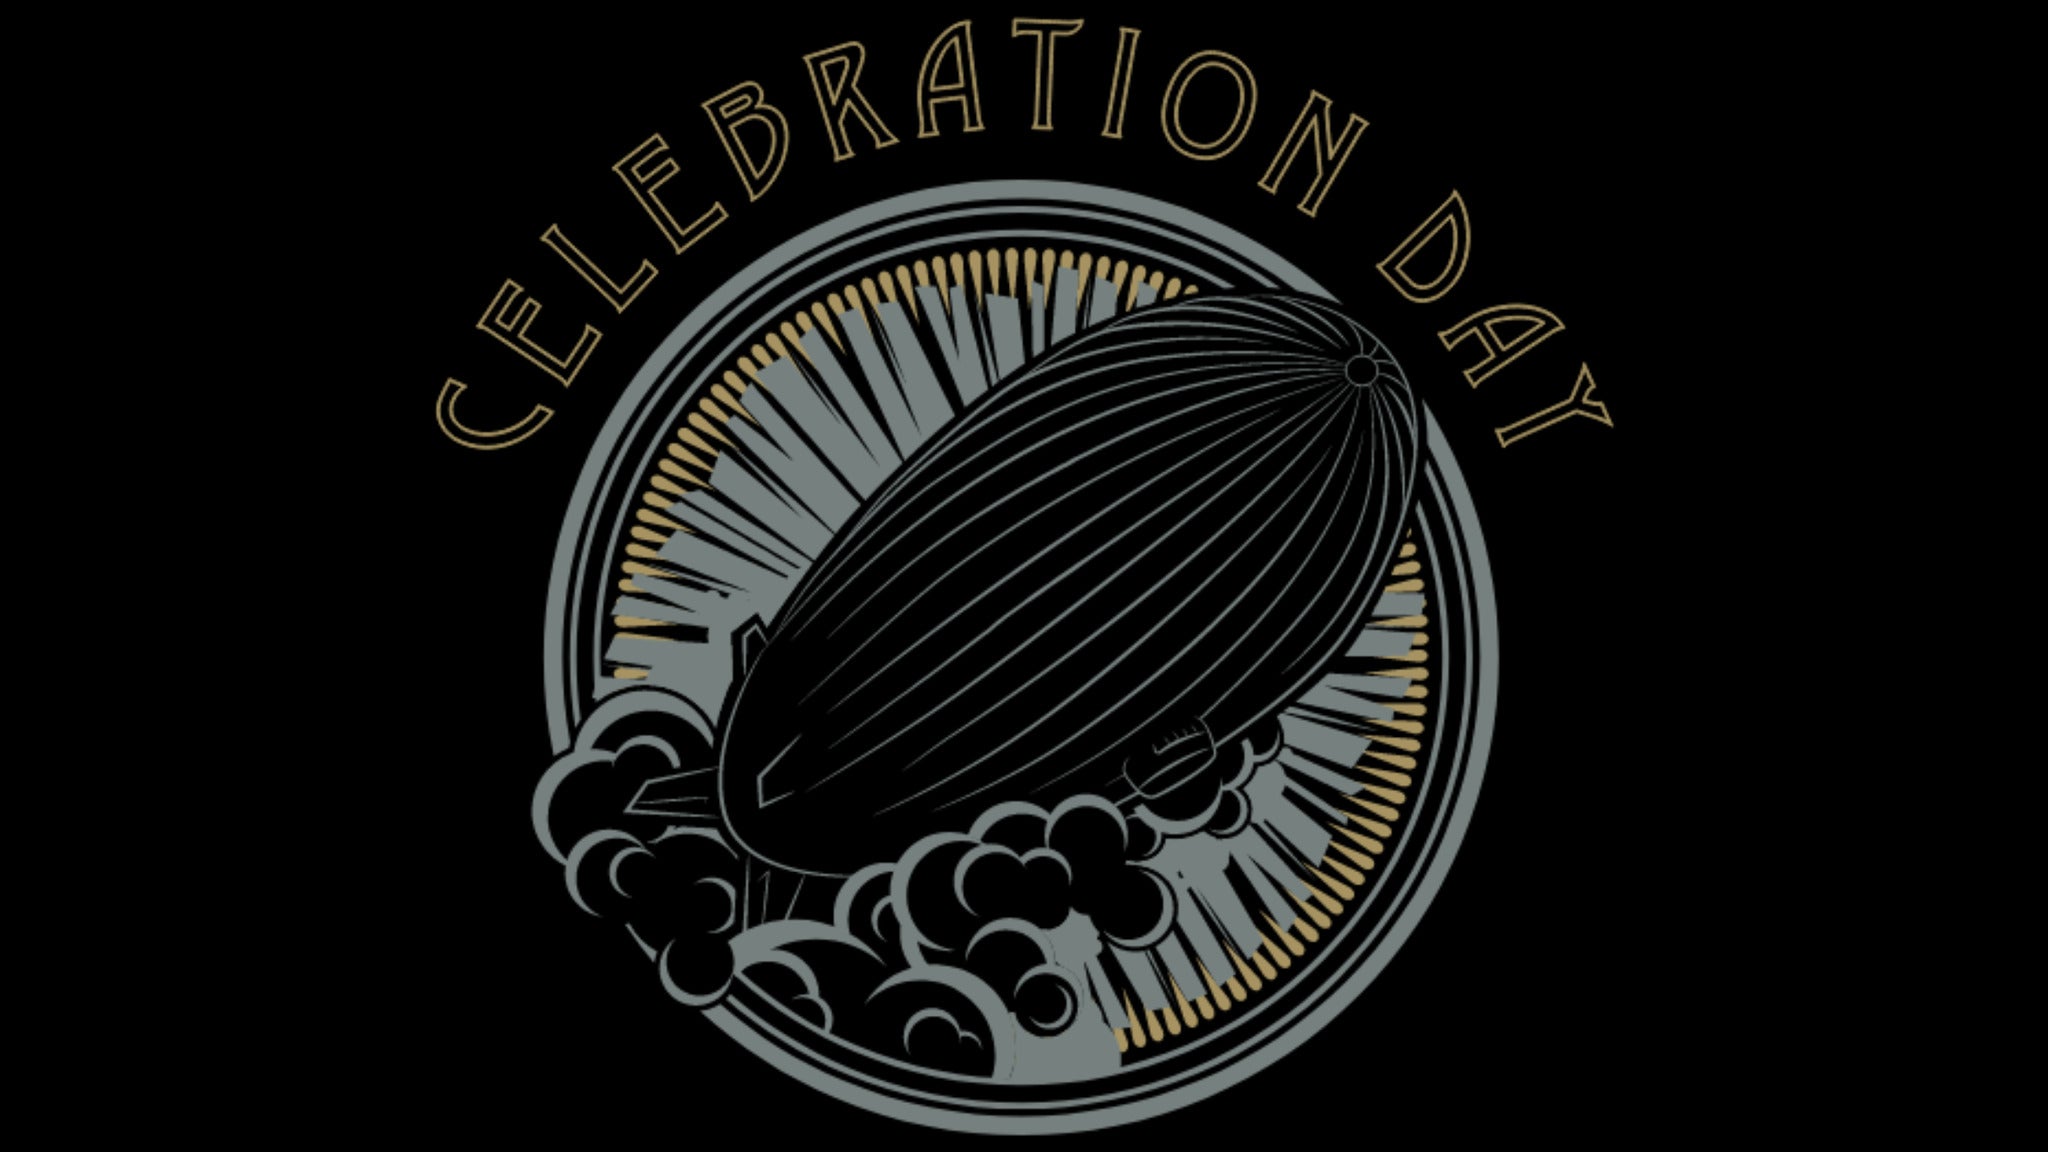 Celebration Day - A Tribute To Led Zeppelin at The Pageant